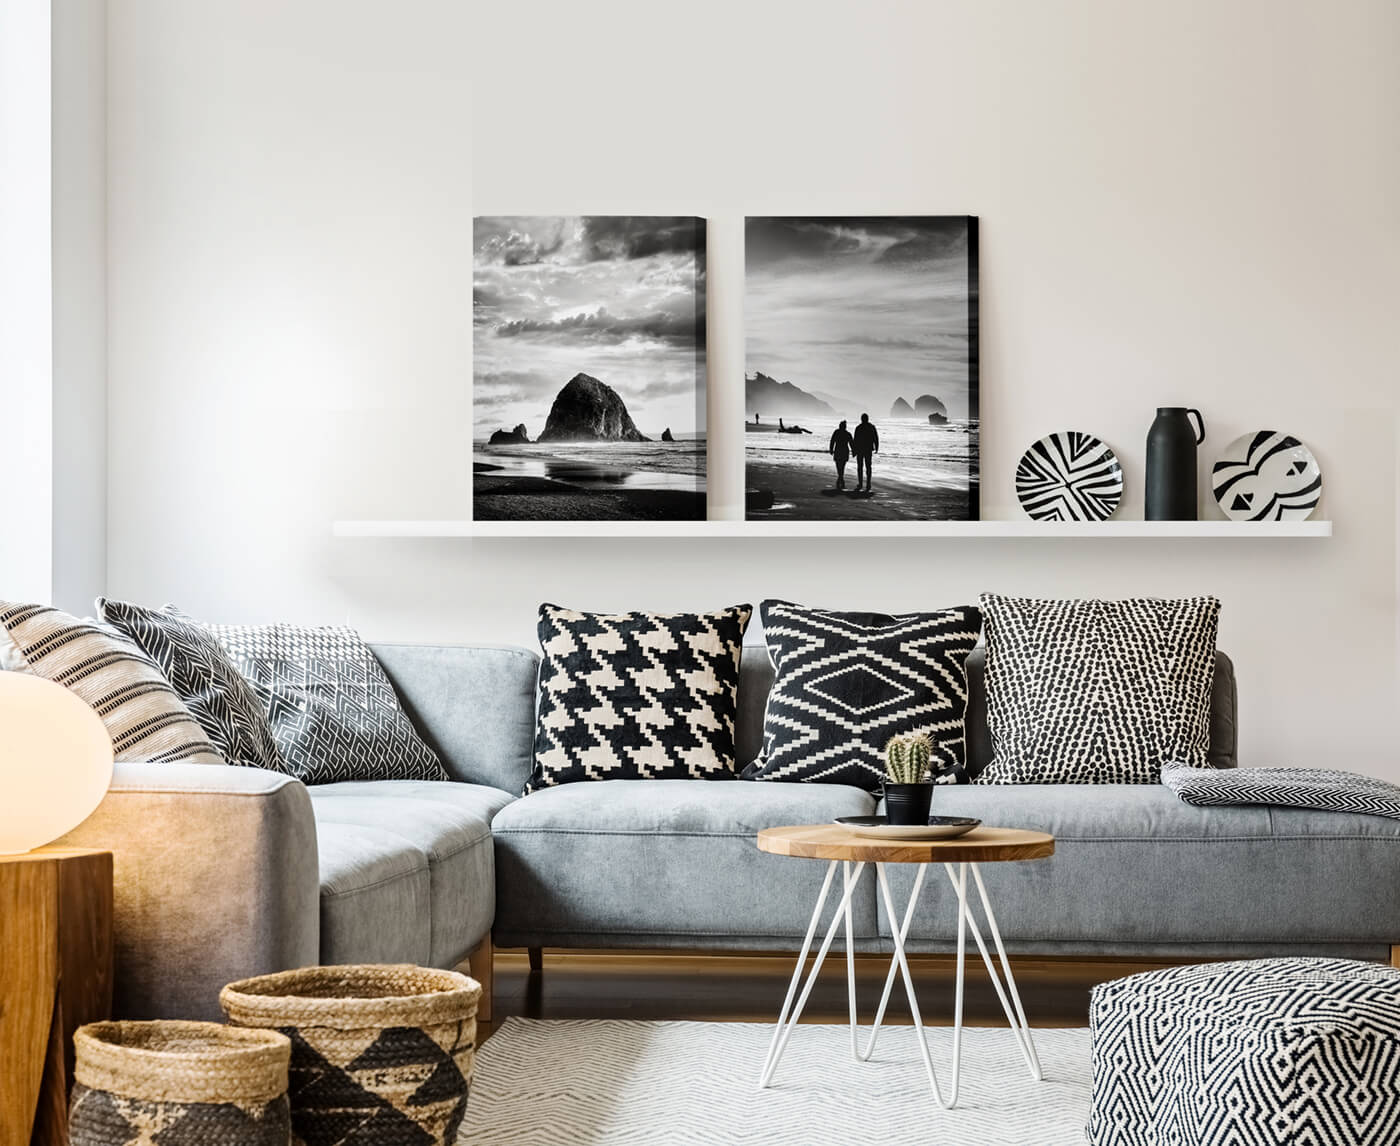 black and white canvases by printiuqe in living room view